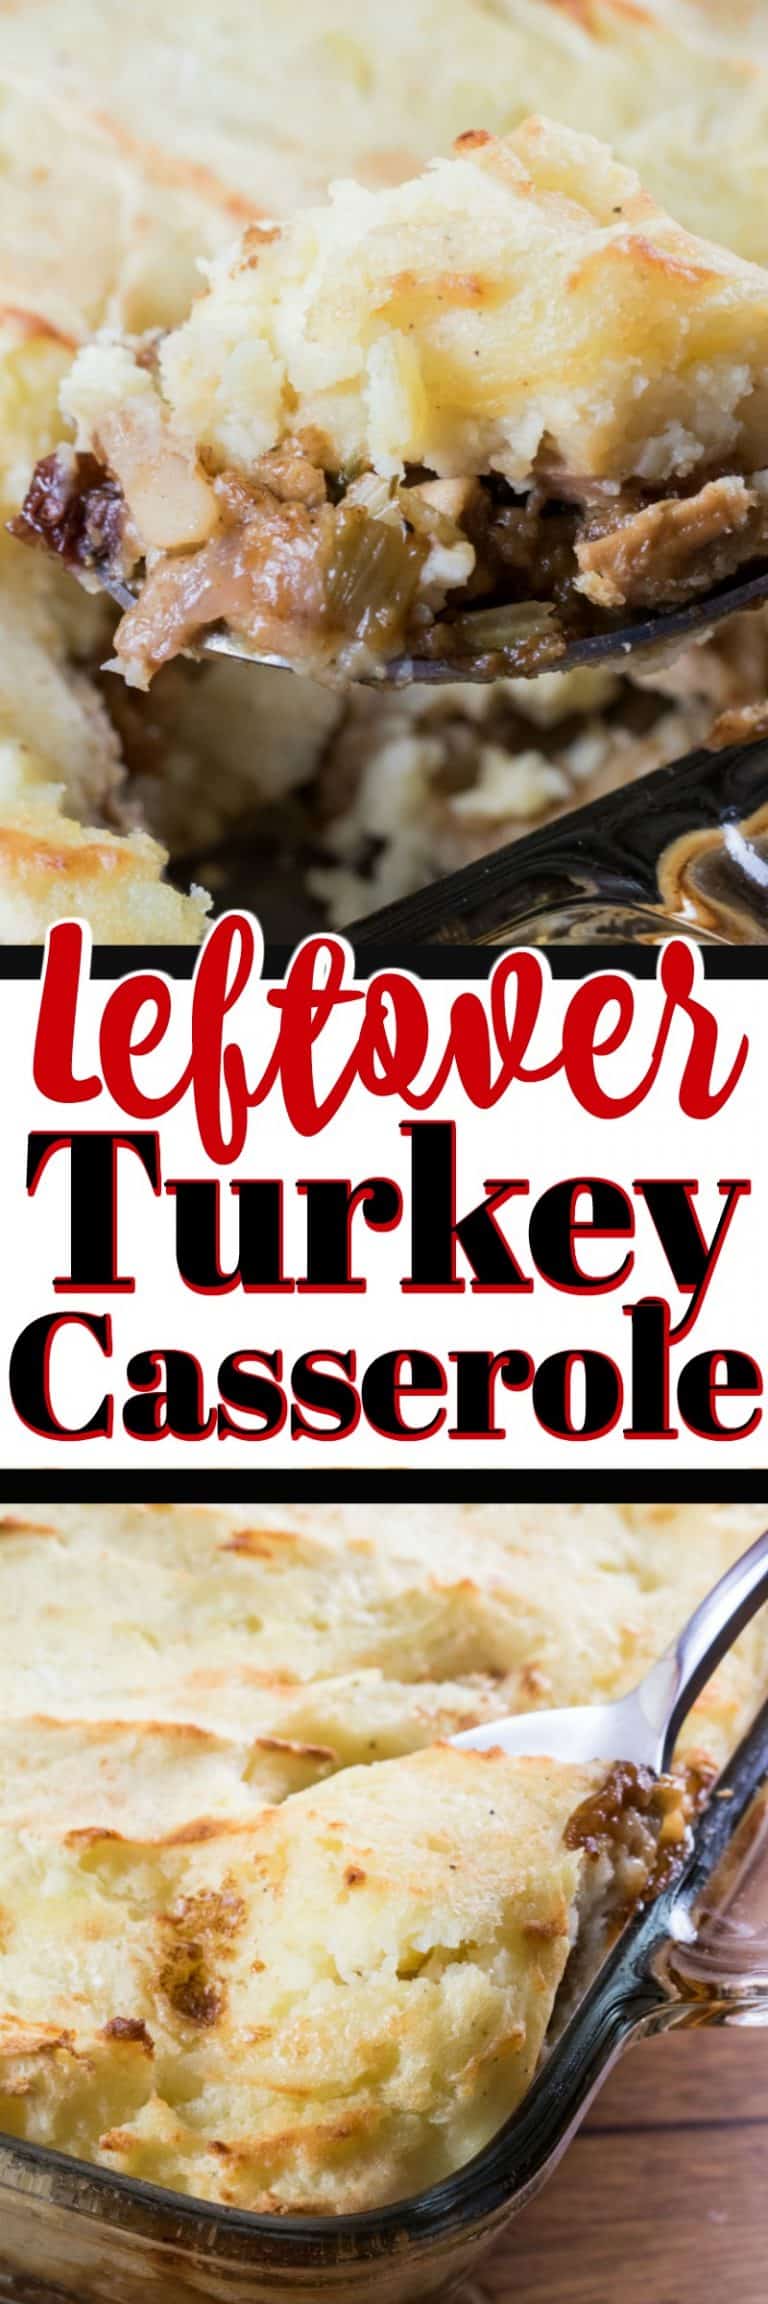 Leftover Turkey Casserole with Stuffing - Noshing With the Nolands